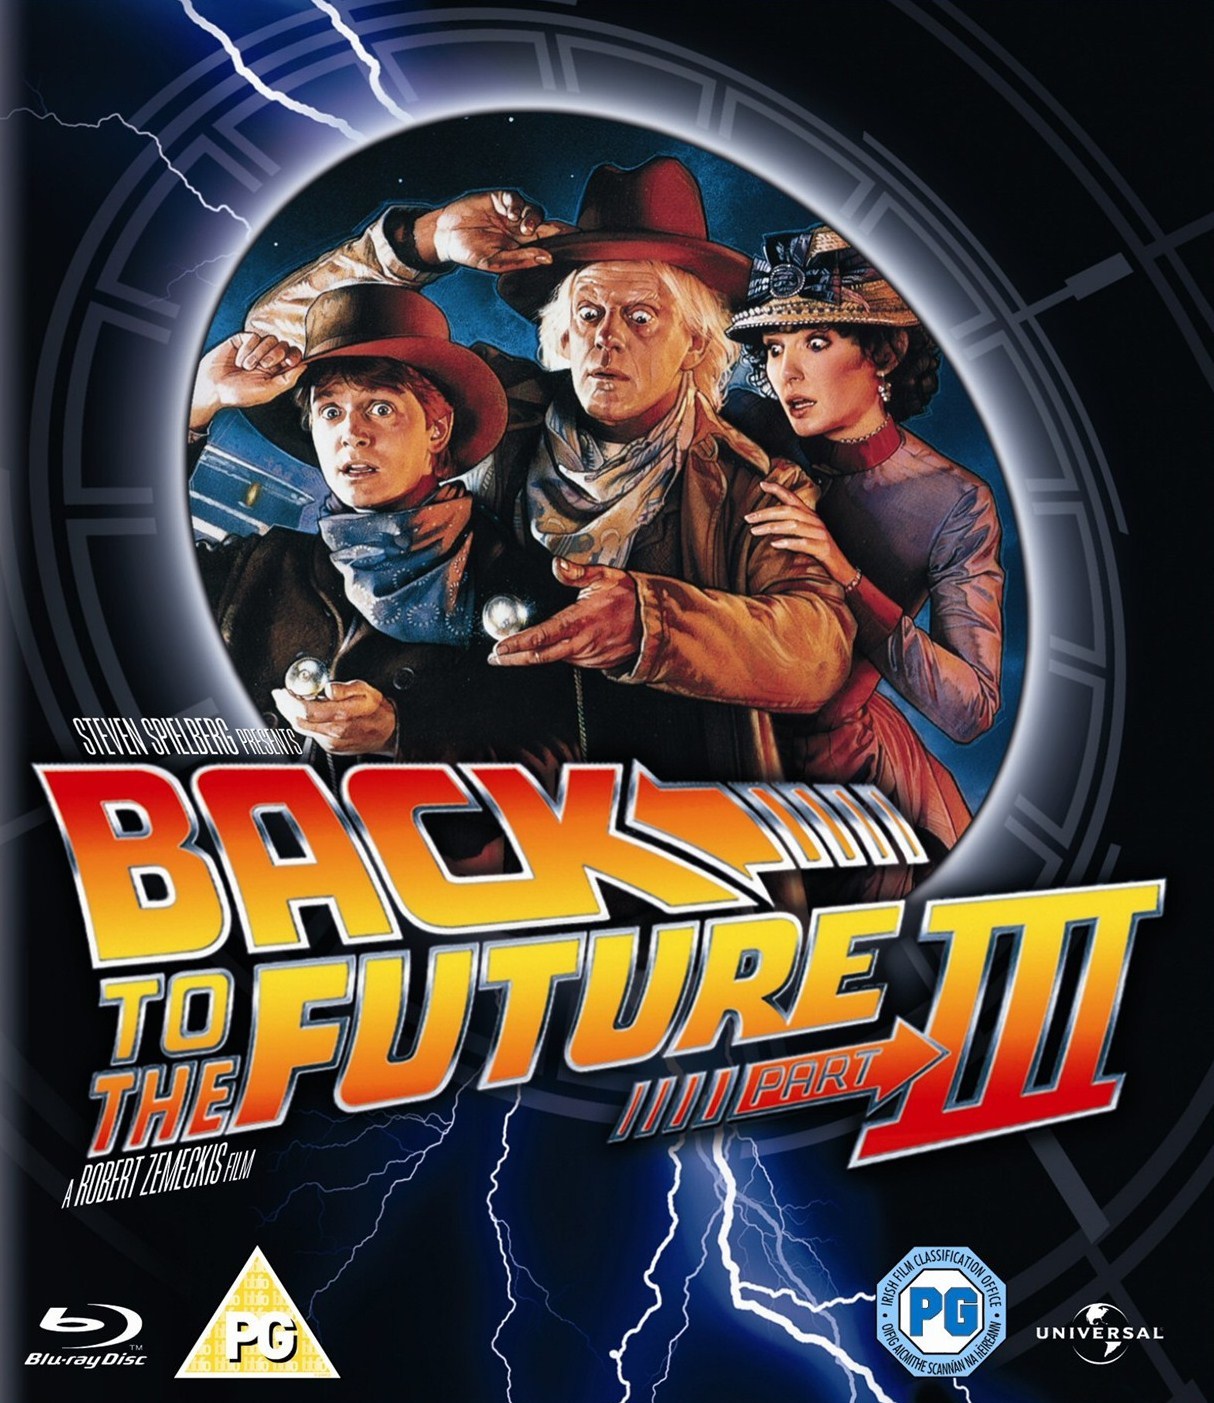 what year did back to the future 3 come out